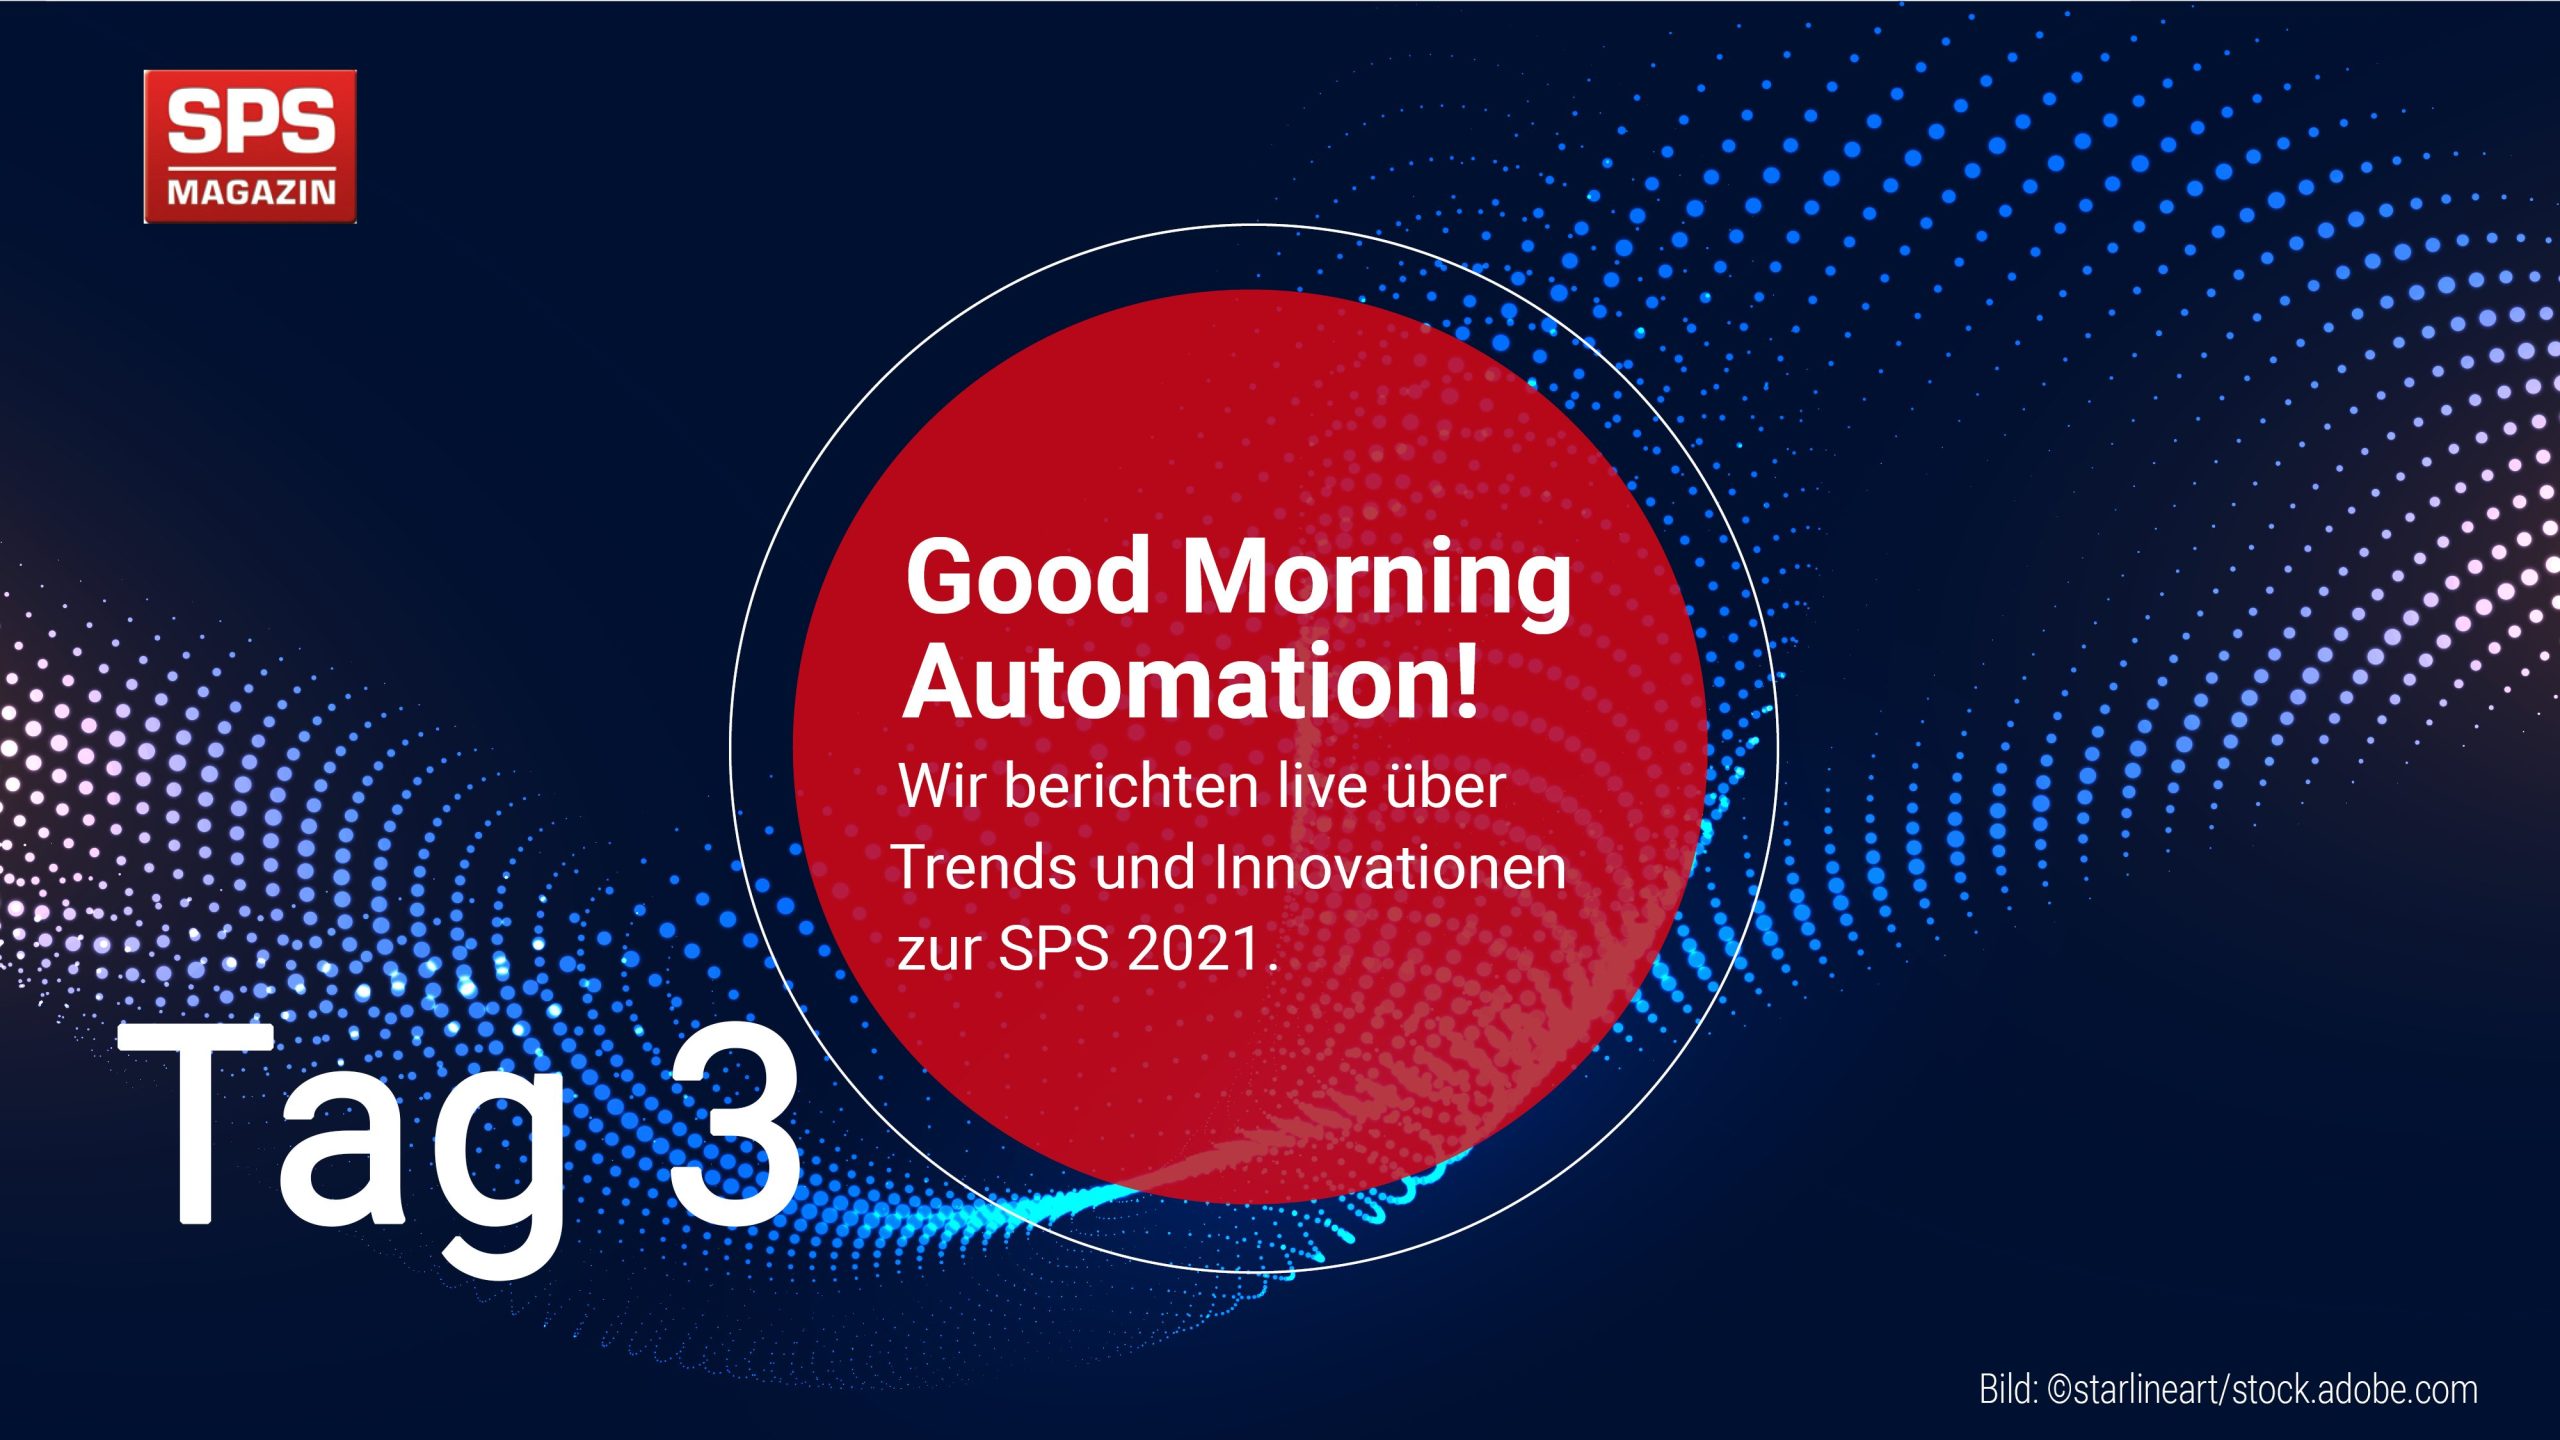 GOOD MORNING AUTOMATION – TAG 3 LIVE AB 10 UHR!